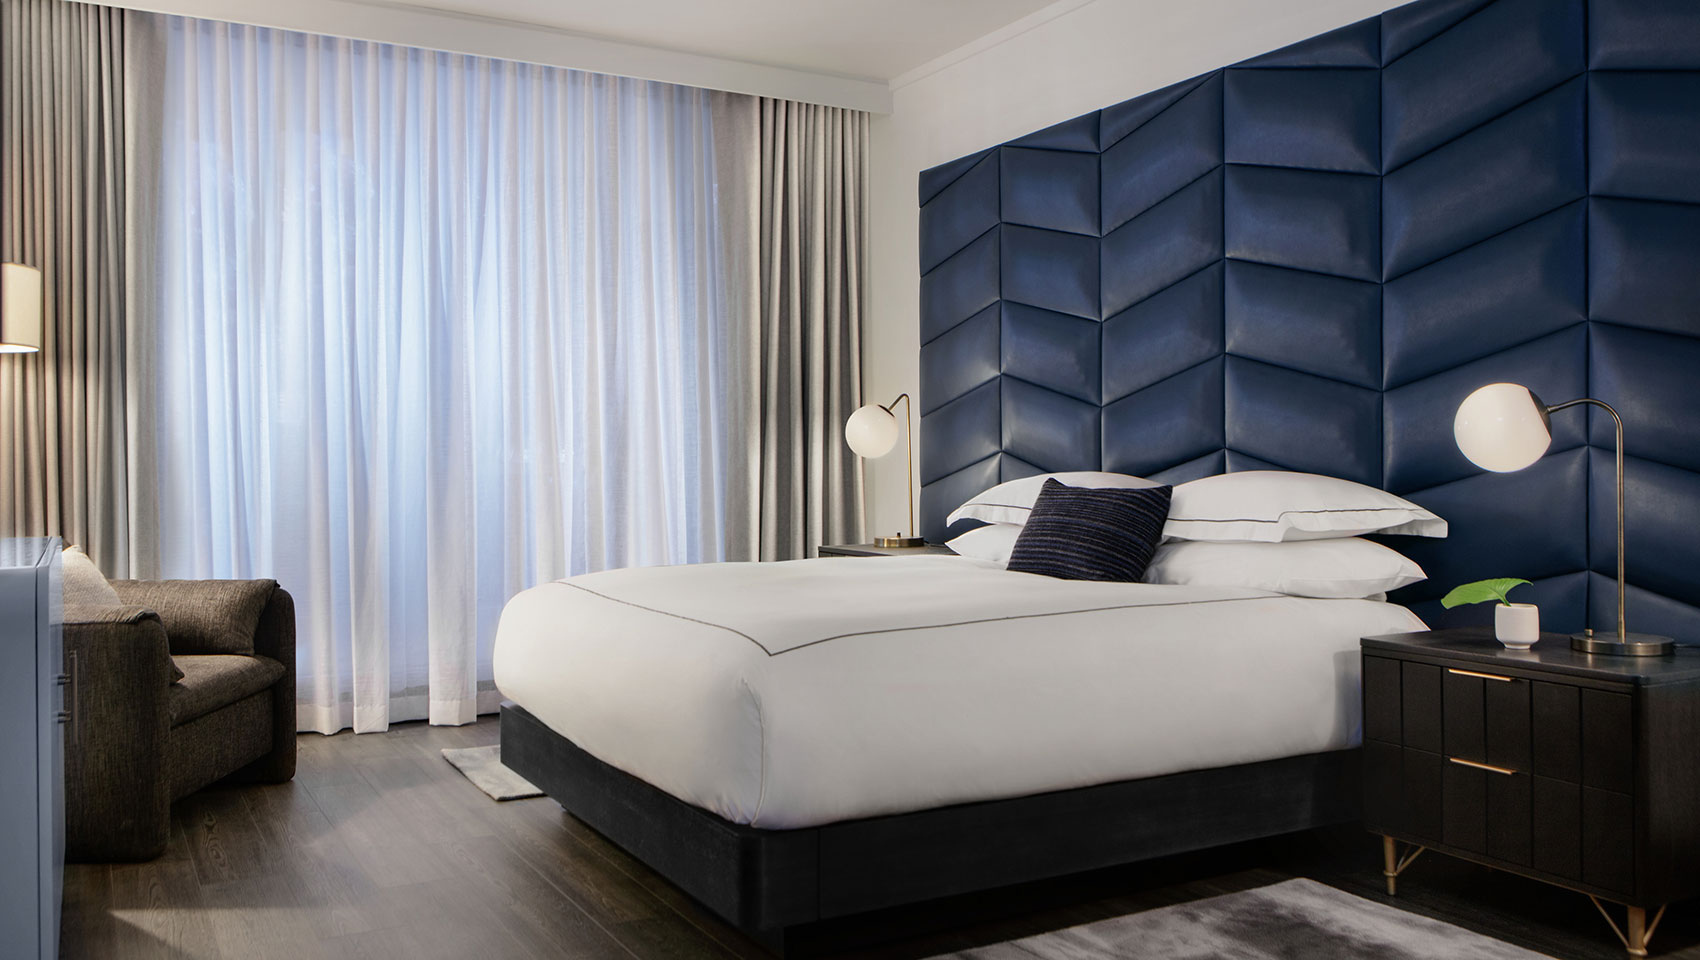 Kimpton Shane guestroom king size bed with blue headboard